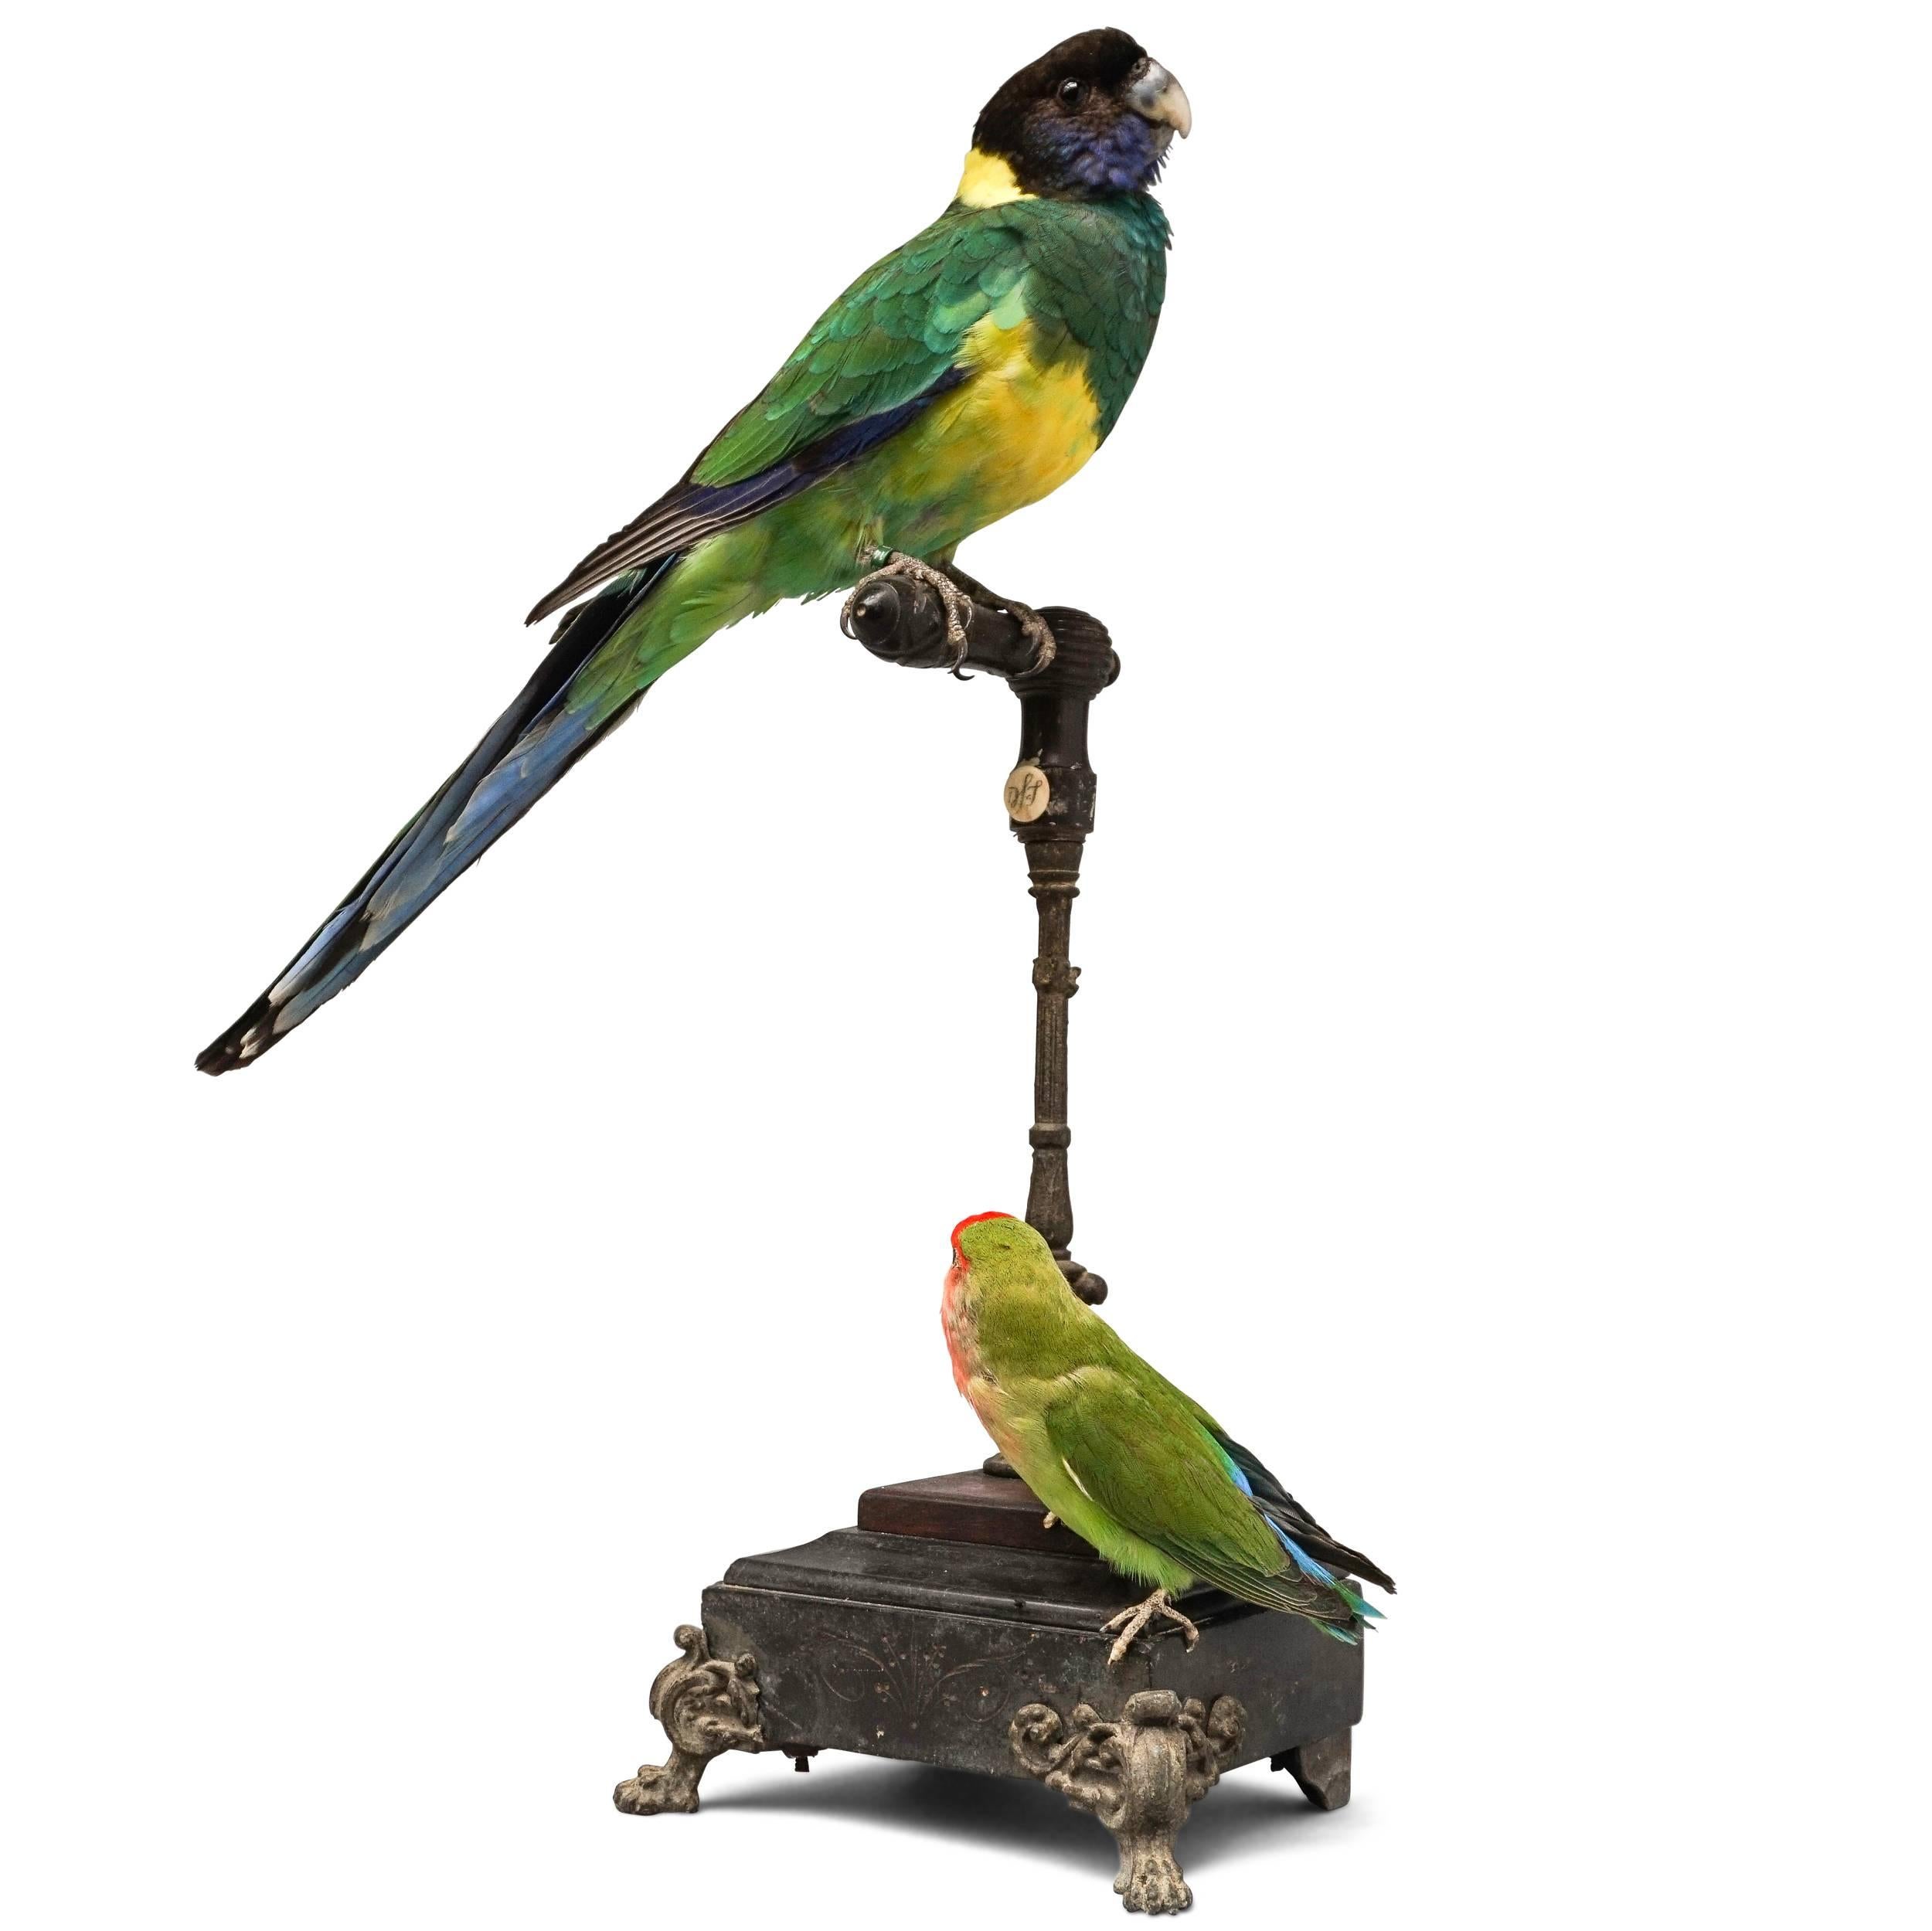 A Port Lincoln Parrot (Barnardius zonarius) and a Rosy-faced lovebird (Agapornis roseicollis) Together mounted on an antique base created out of marble, brass and wood. 

Note: This object is on display at JAMB, Pimlico Rd. London.

Note: None